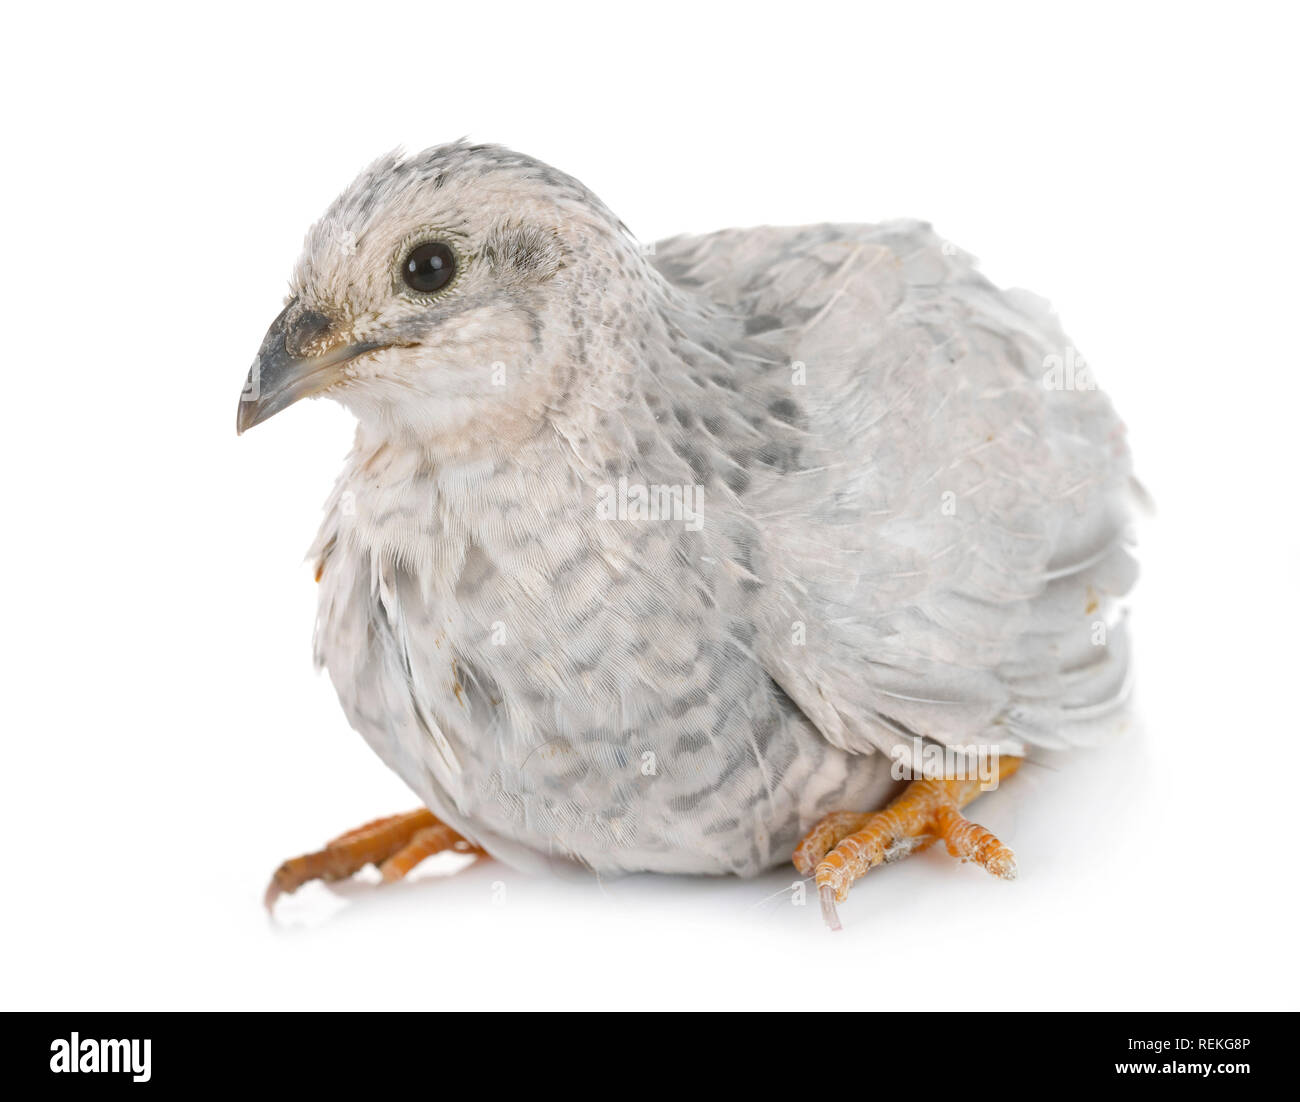 King quail in front of white background Stock Photo